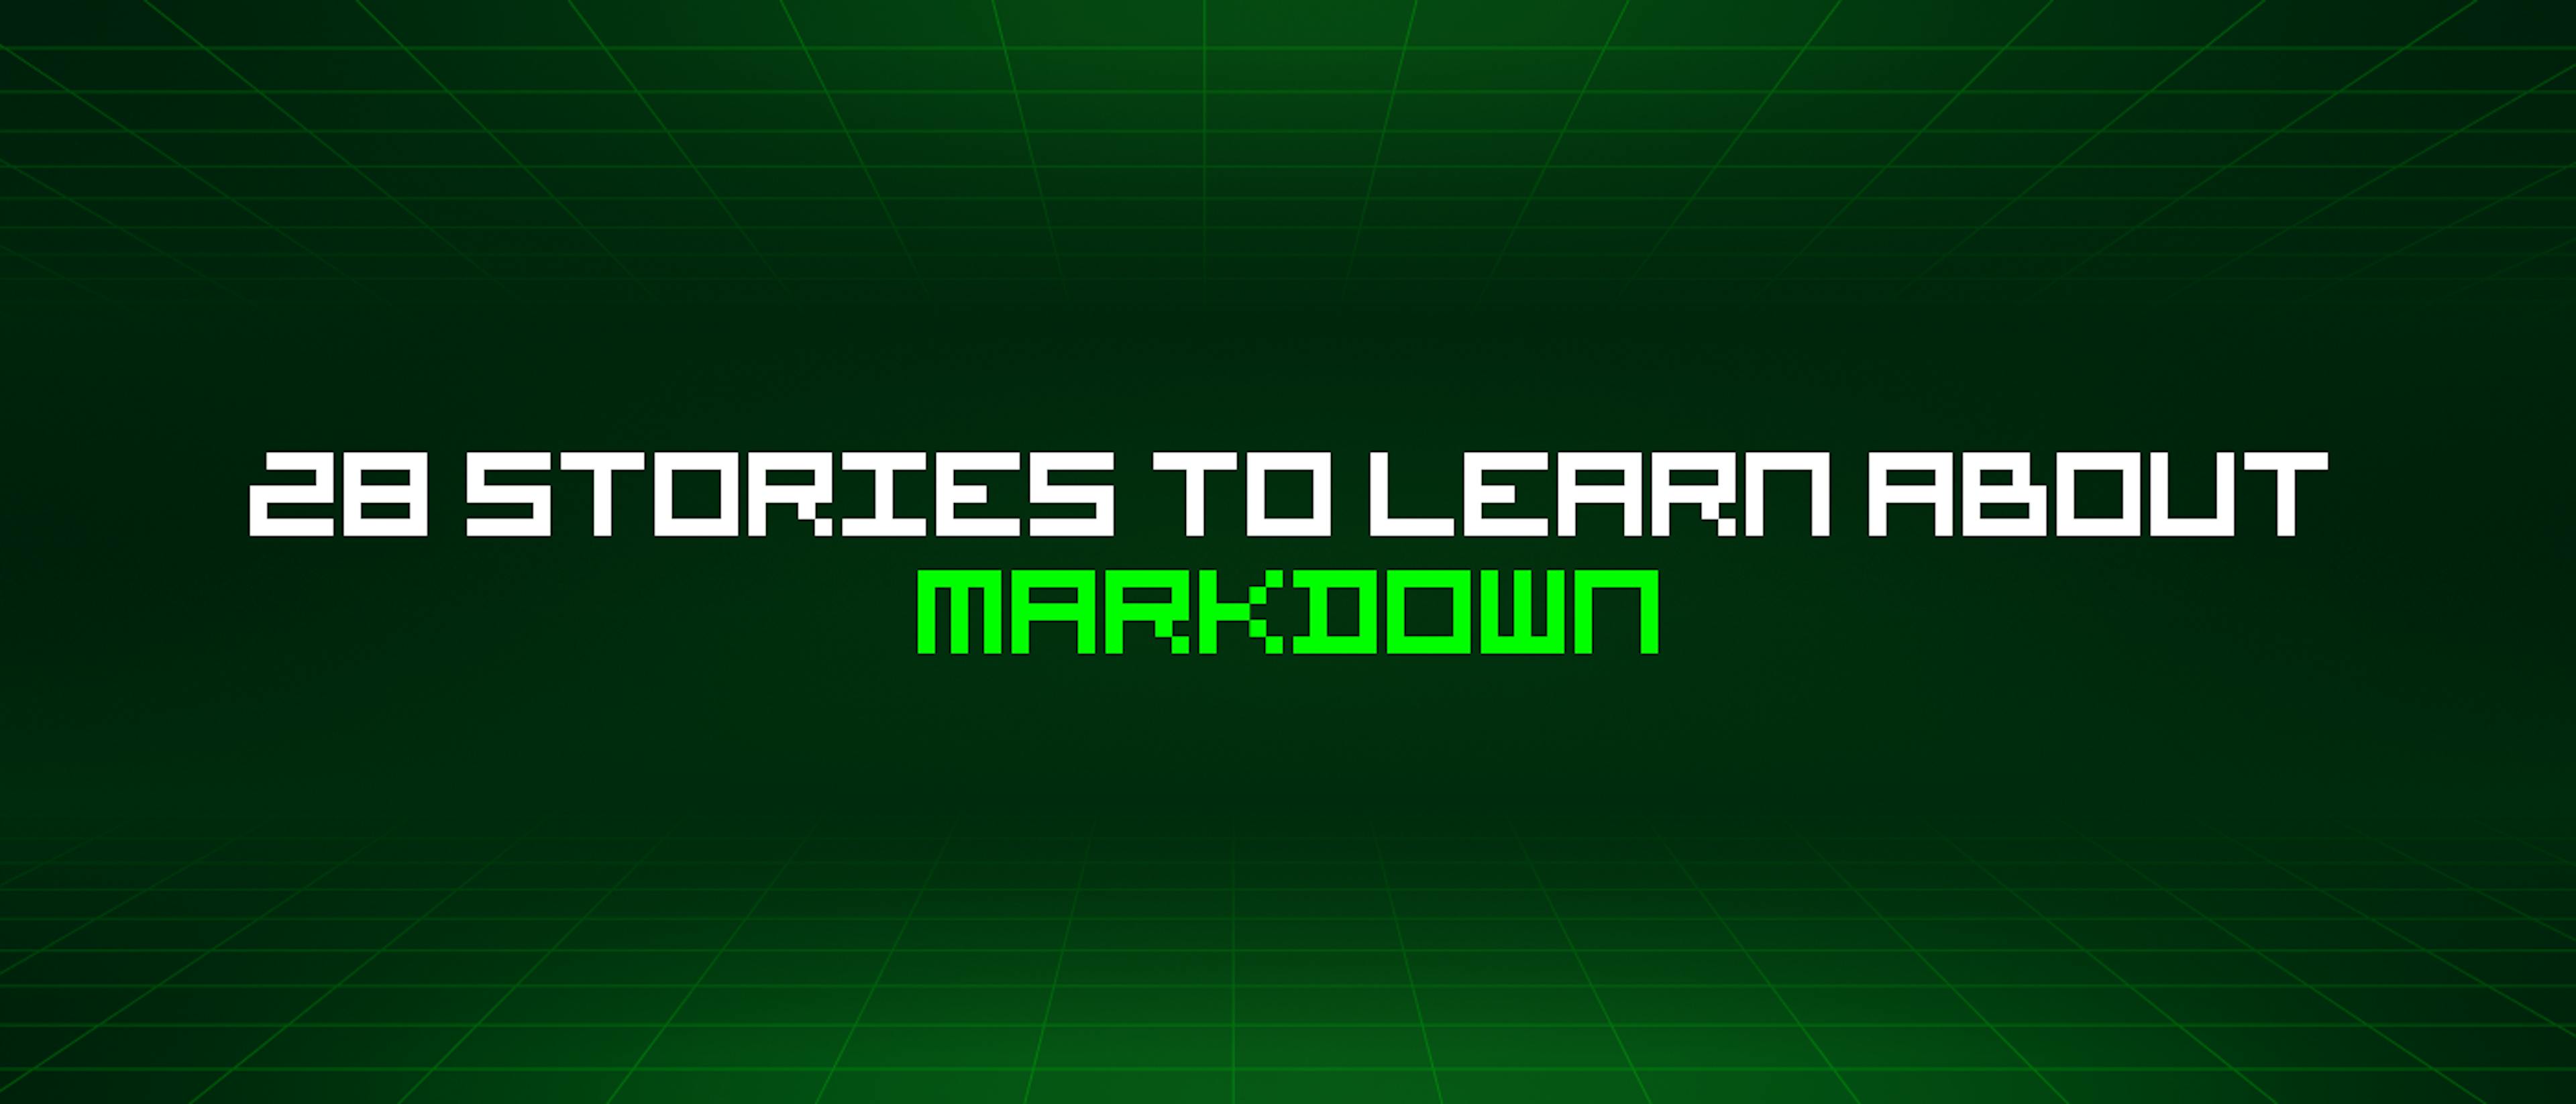 featured image - 28 Stories To Learn About Markdown